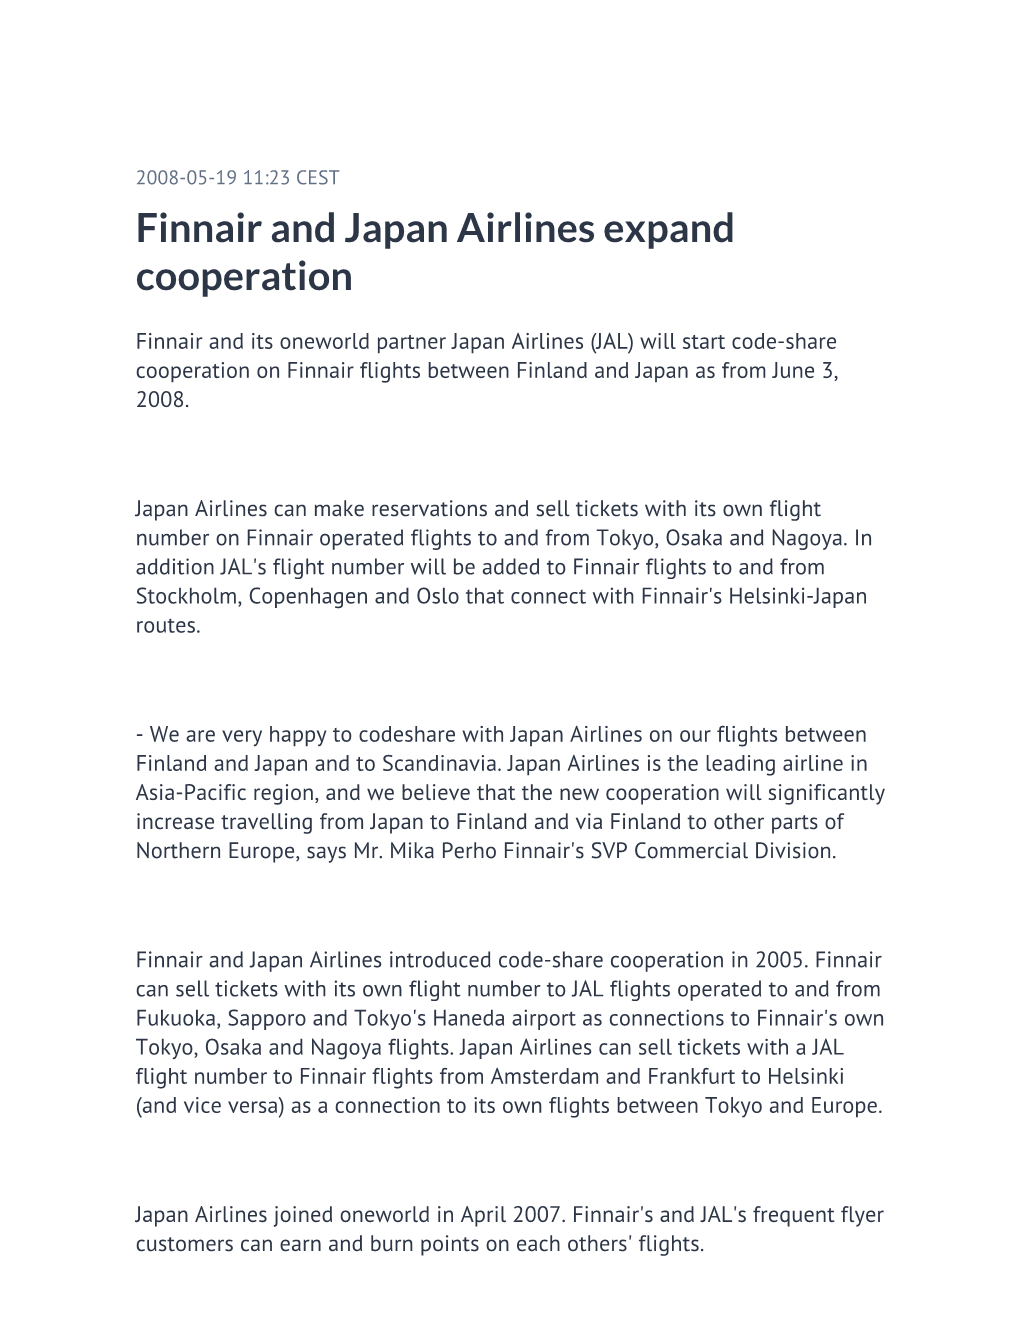 Finnair and Japan Airlines Expand Cooperation